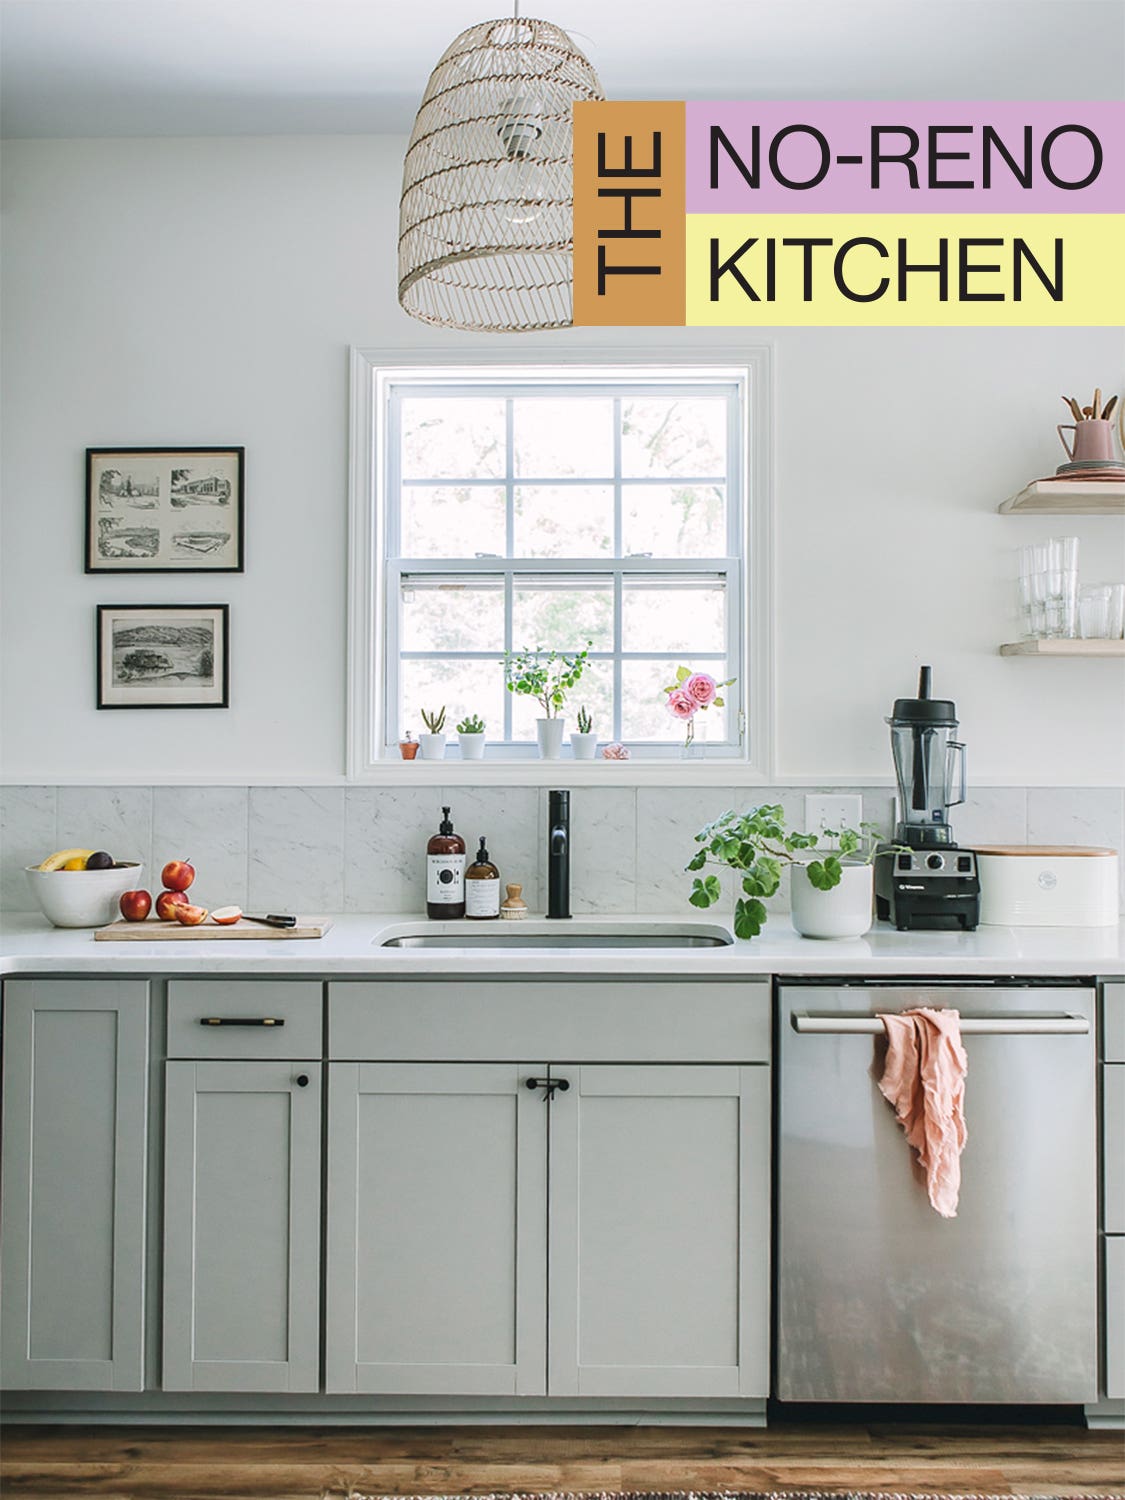 Cheap Kitchen Cabinets Don’t Need to Look Cheap, Too